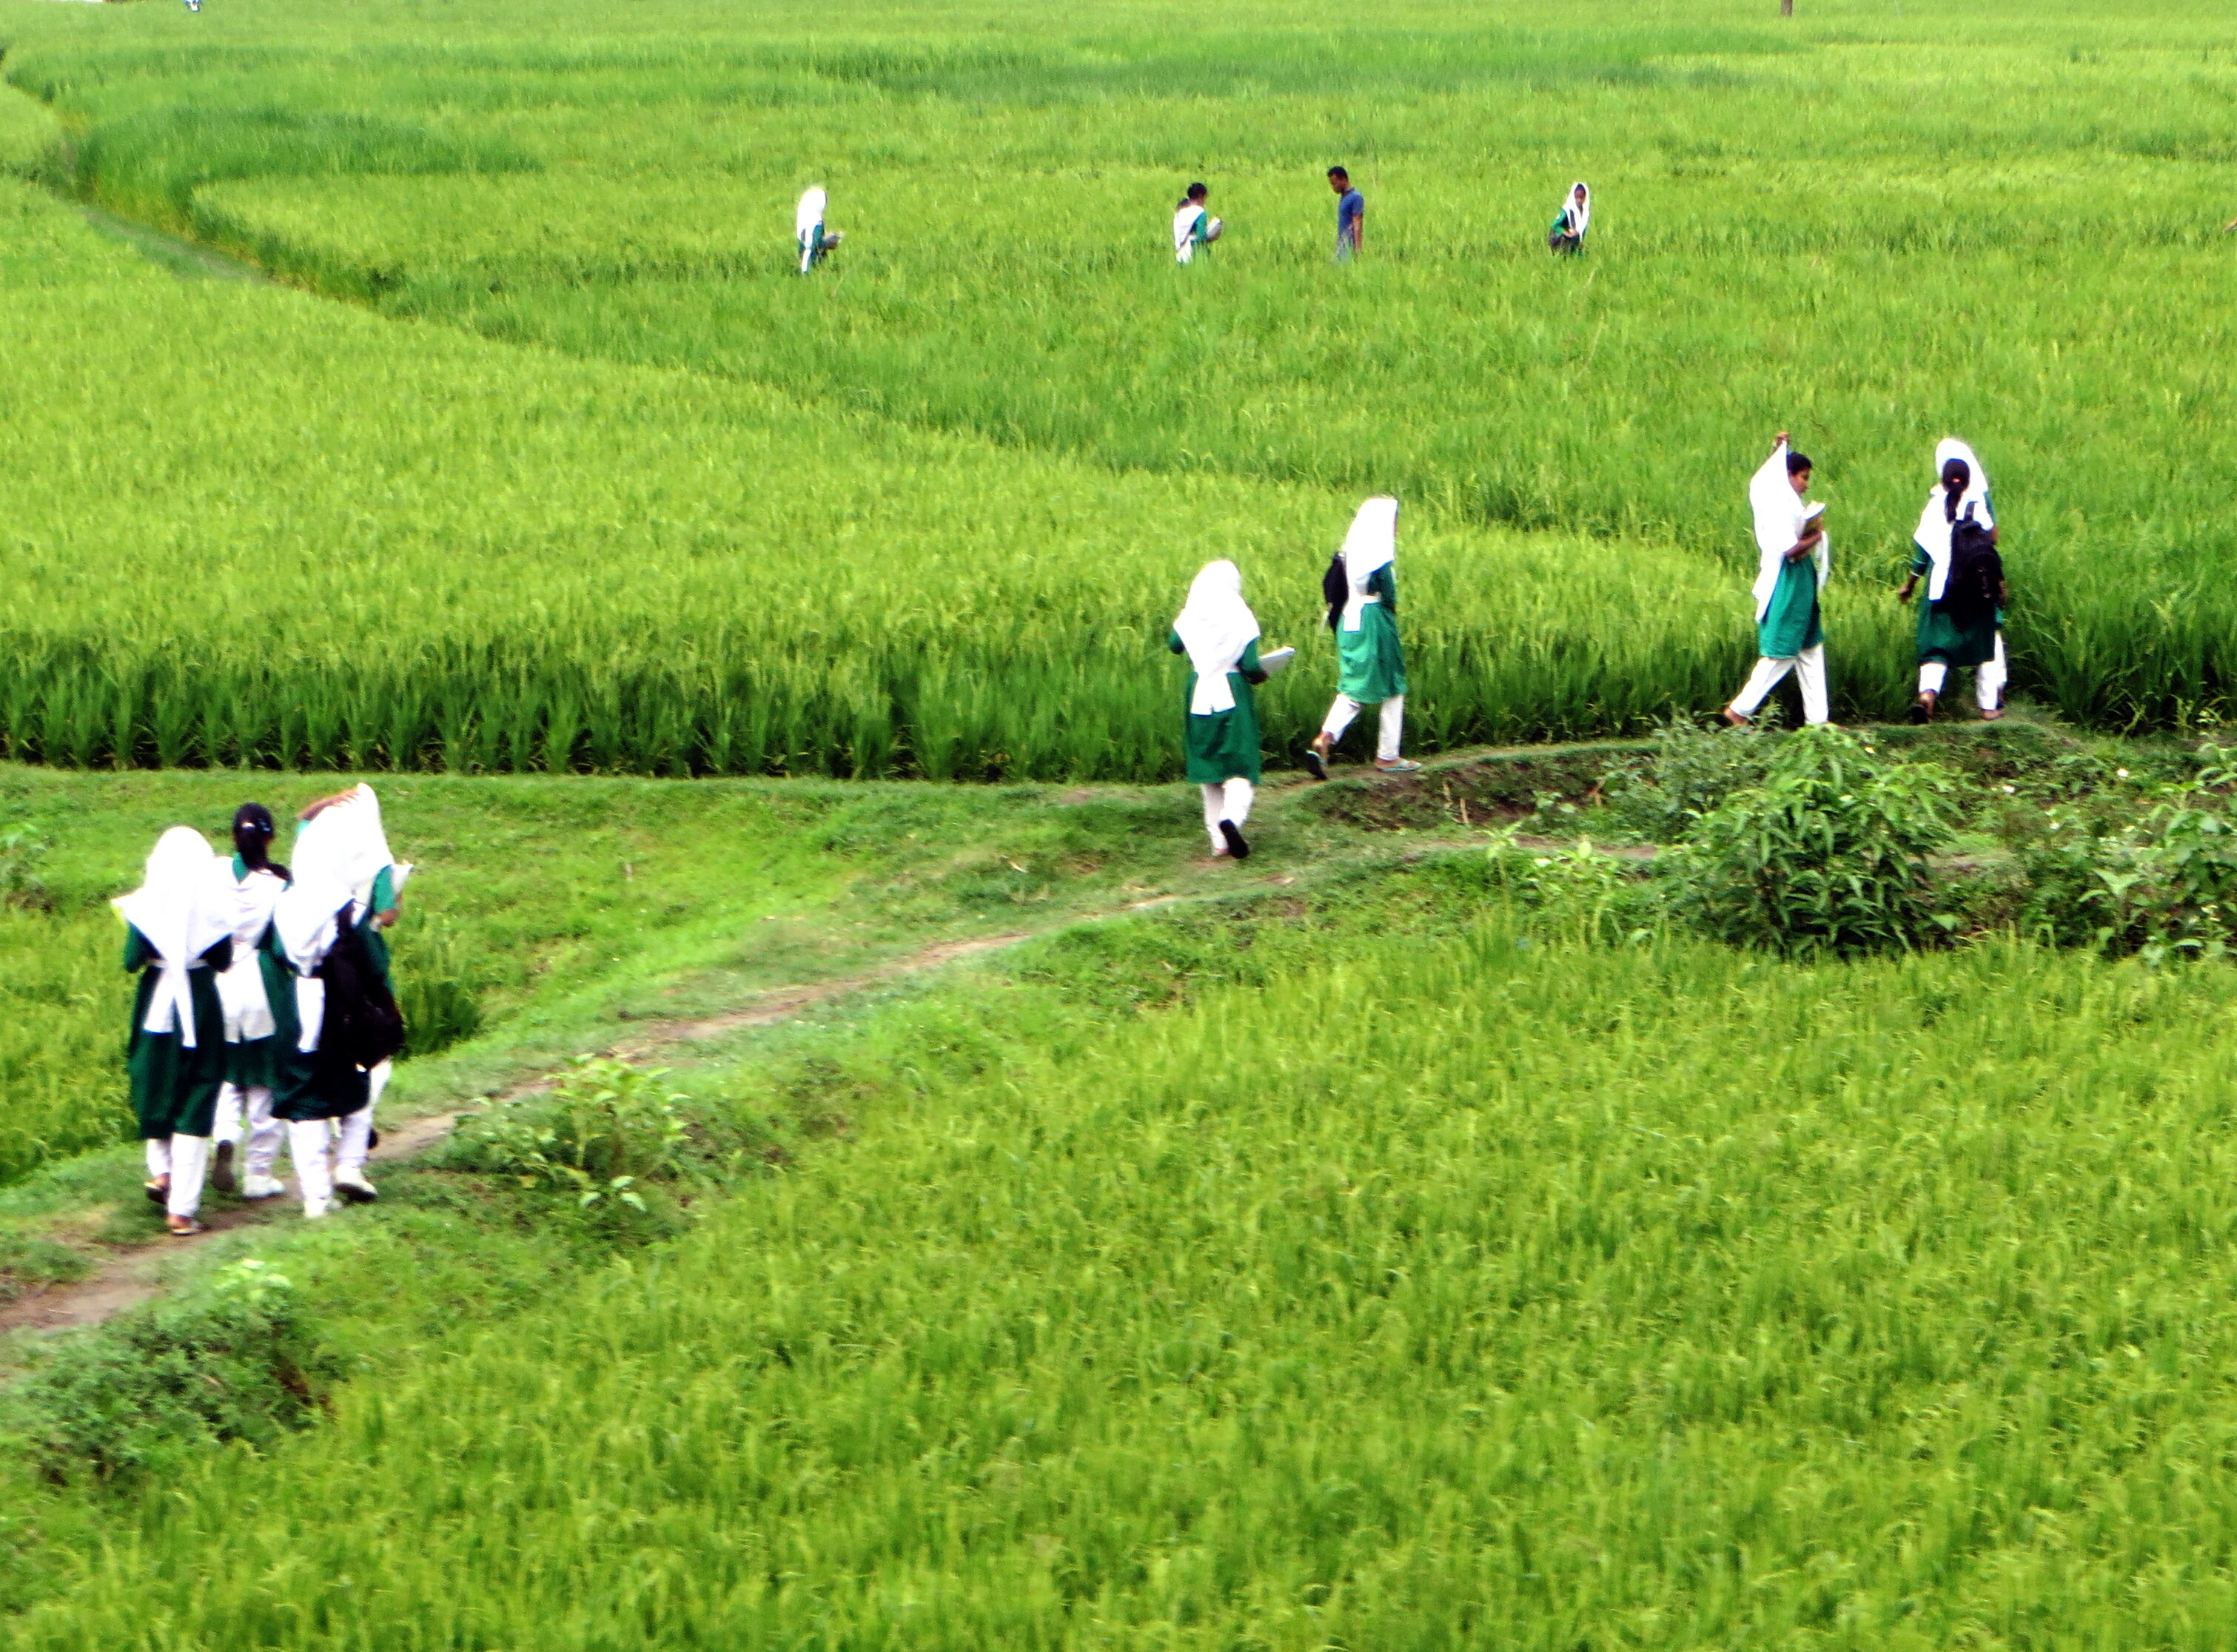 Girls walking home from school through the paddy fields